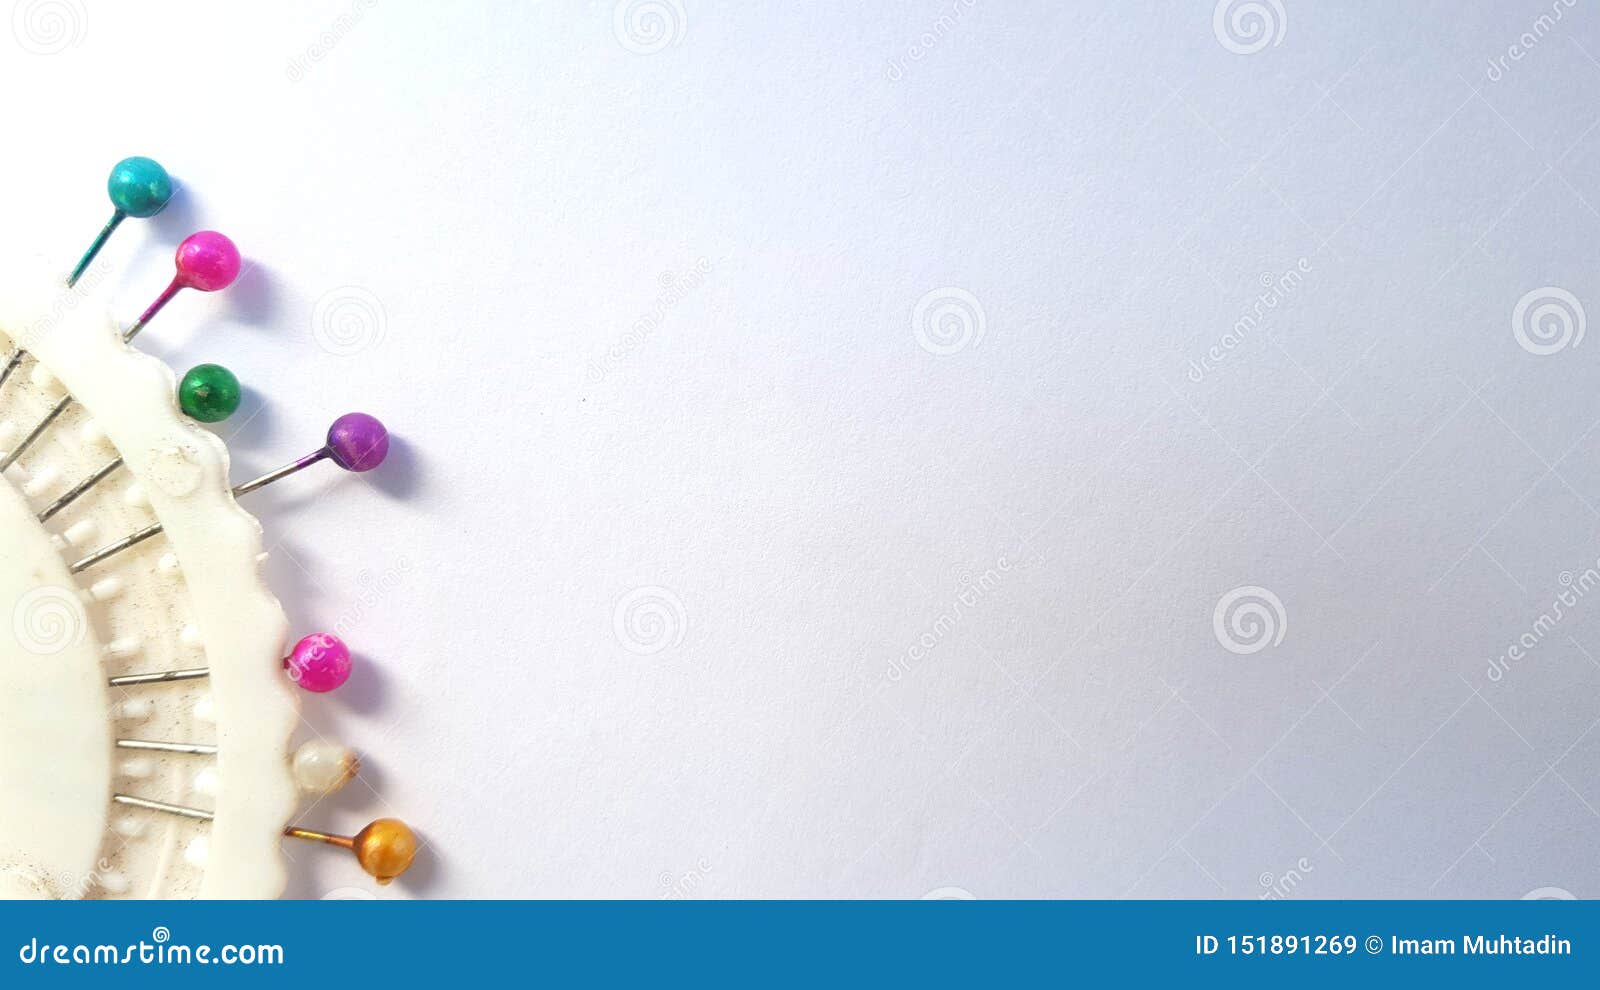 Closeup of Colorfull Needle Push Pins Stock Image - Image of cotton ...